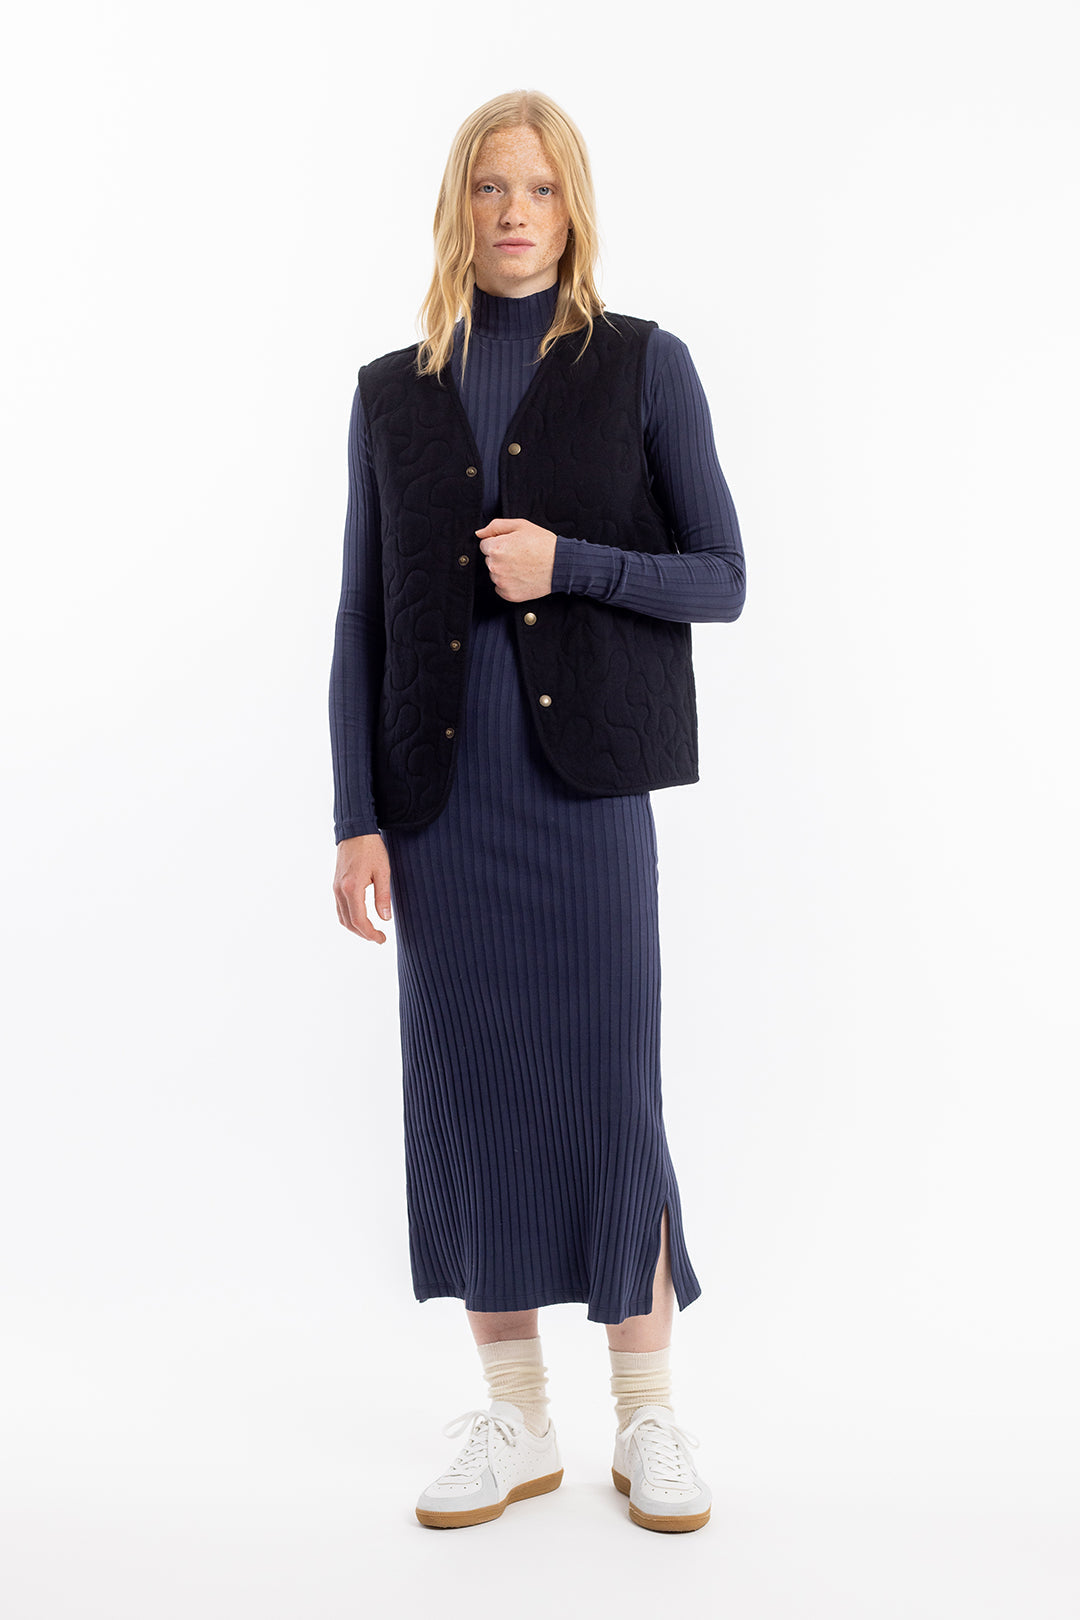 Dark blue, ribbed dress made of organic cotton from Rotholz